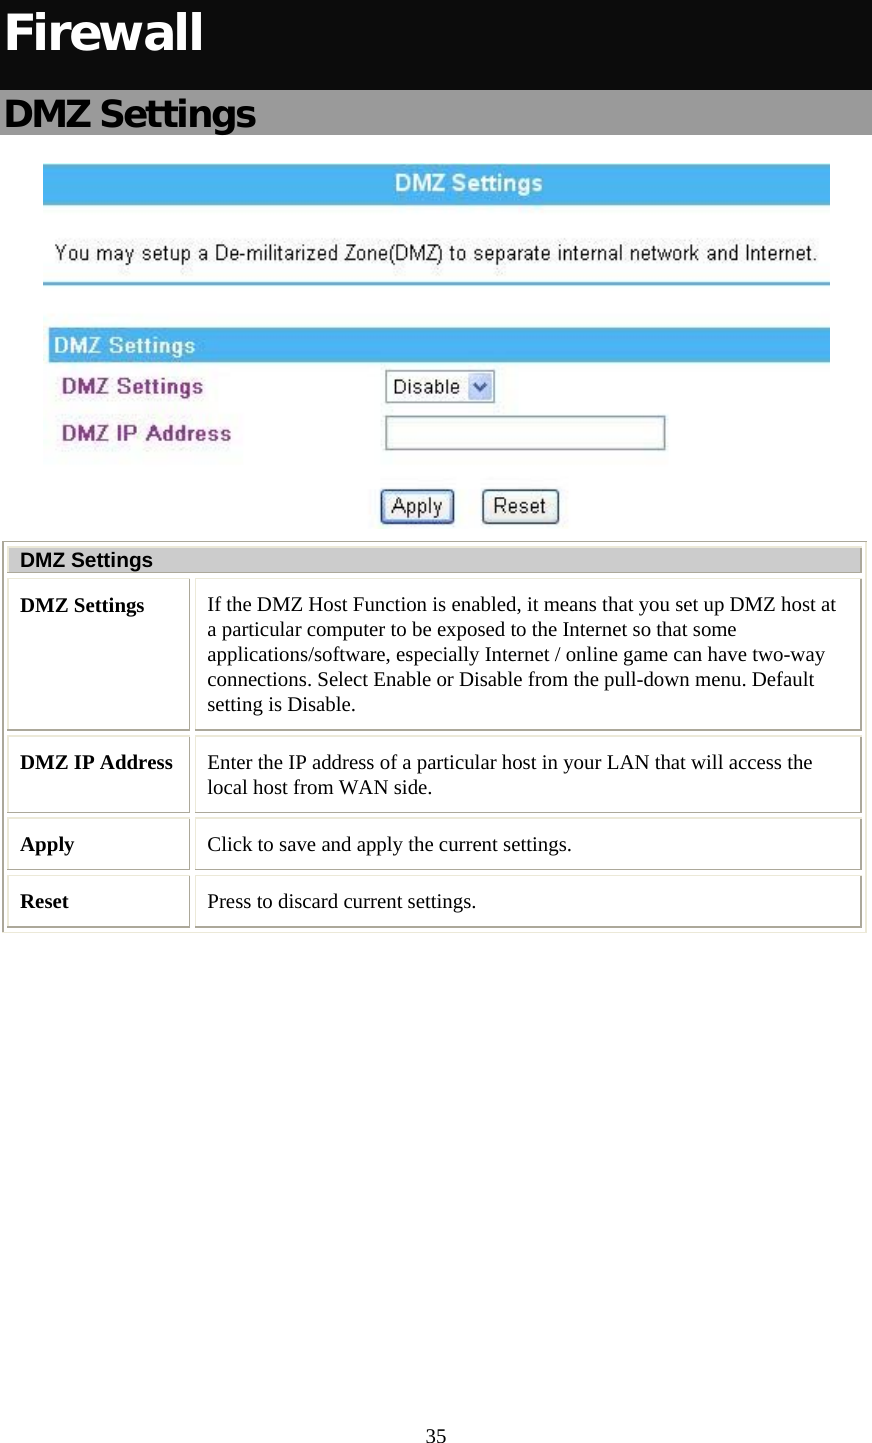   35 Firewall DMZ Settings  DMZ Settings DMZ Settings  If the DMZ Host Function is enabled, it means that you set up DMZ host at a particular computer to be exposed to the Internet so that some applications/software, especially Internet / online game can have two-way connections. Select Enable or Disable from the pull-down menu. Default setting is Disable. DMZ IP Address  Enter the IP address of a particular host in your LAN that will access the local host from WAN side. Apply  Click to save and apply the current settings. Reset  Press to discard current settings.  